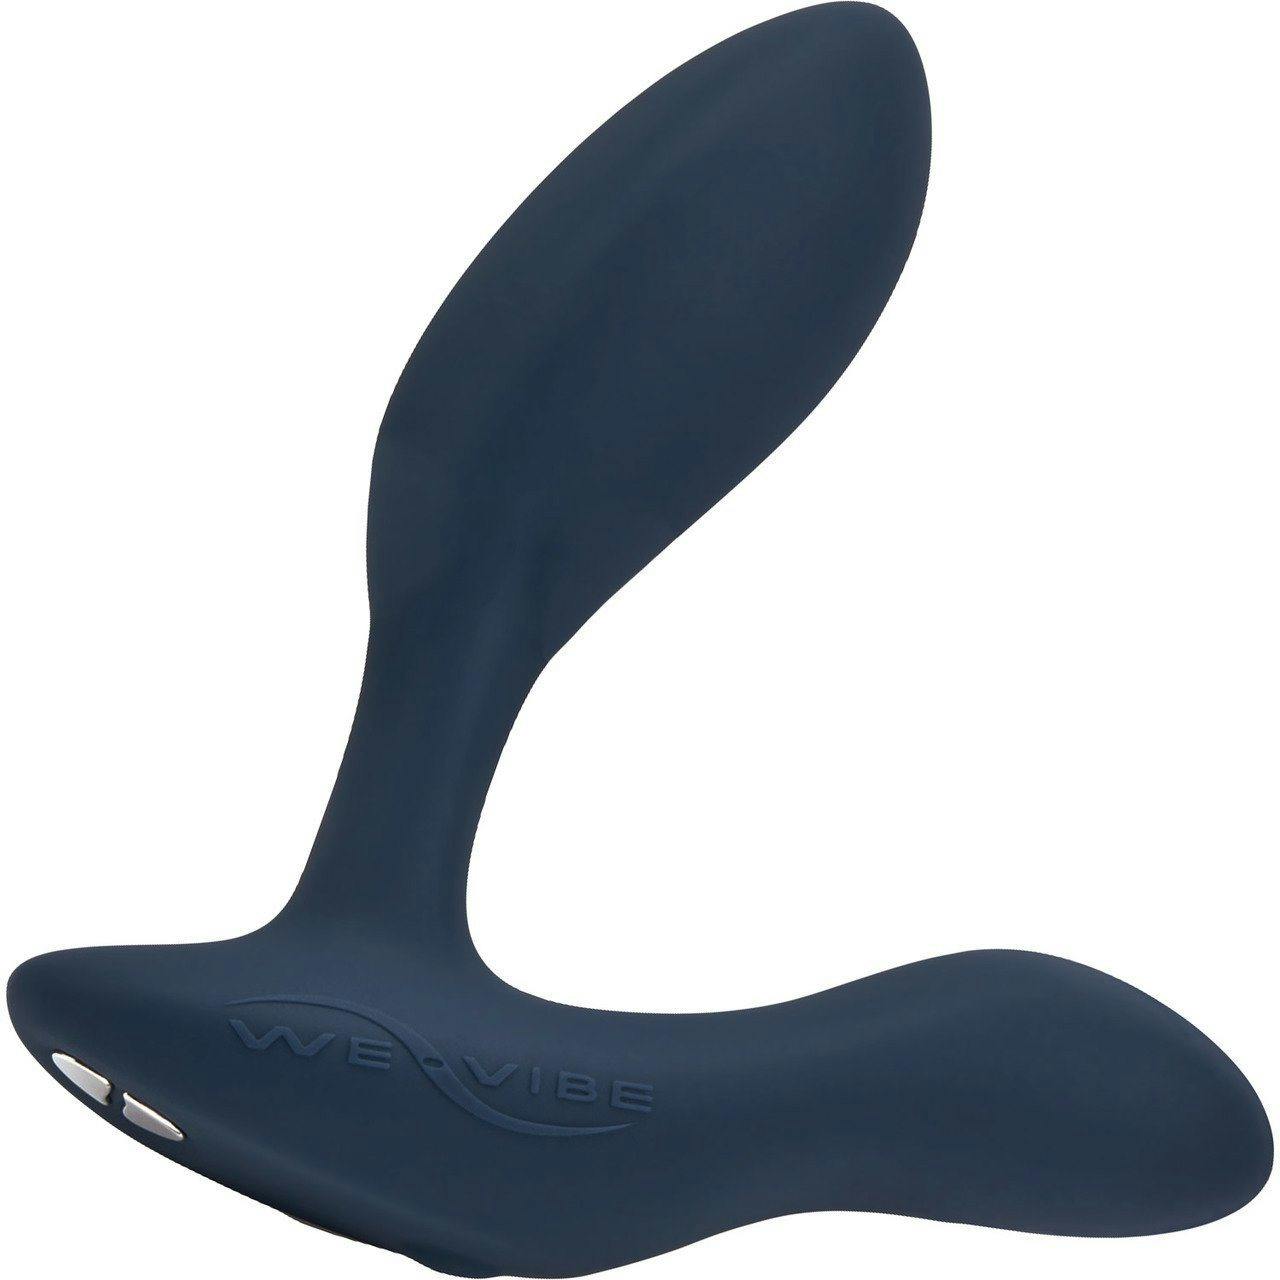 The WE-Vibe Vector 